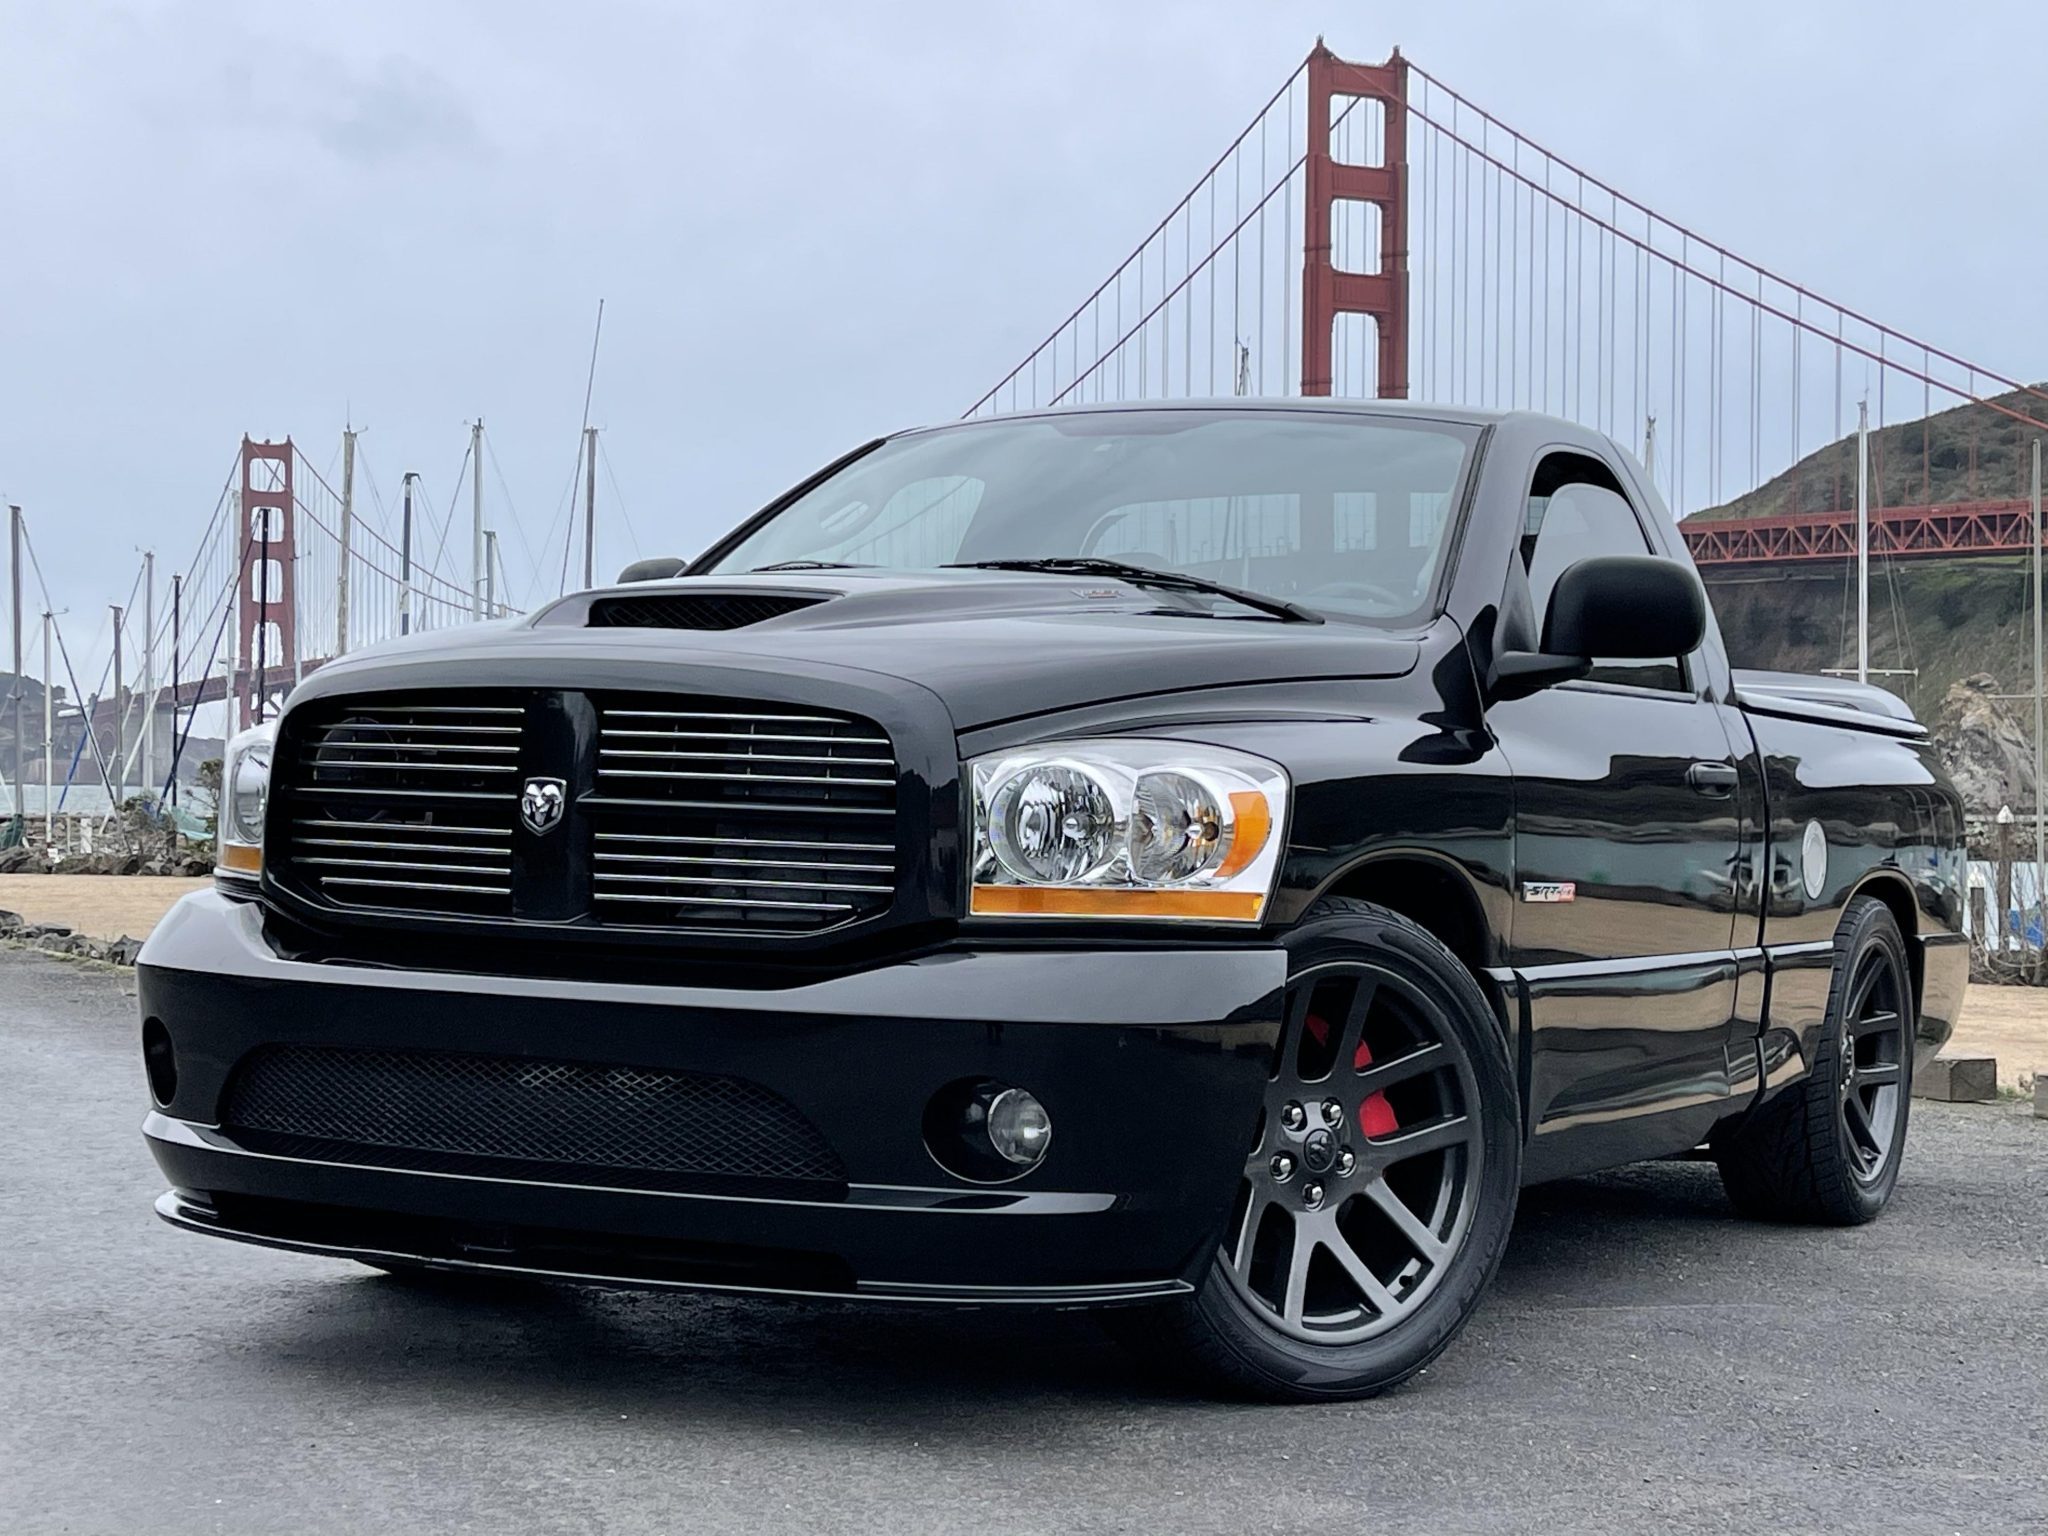 Dodge Ram SRT 10 6 Speed Is A Dying Breed, Won't Stop Whining About It